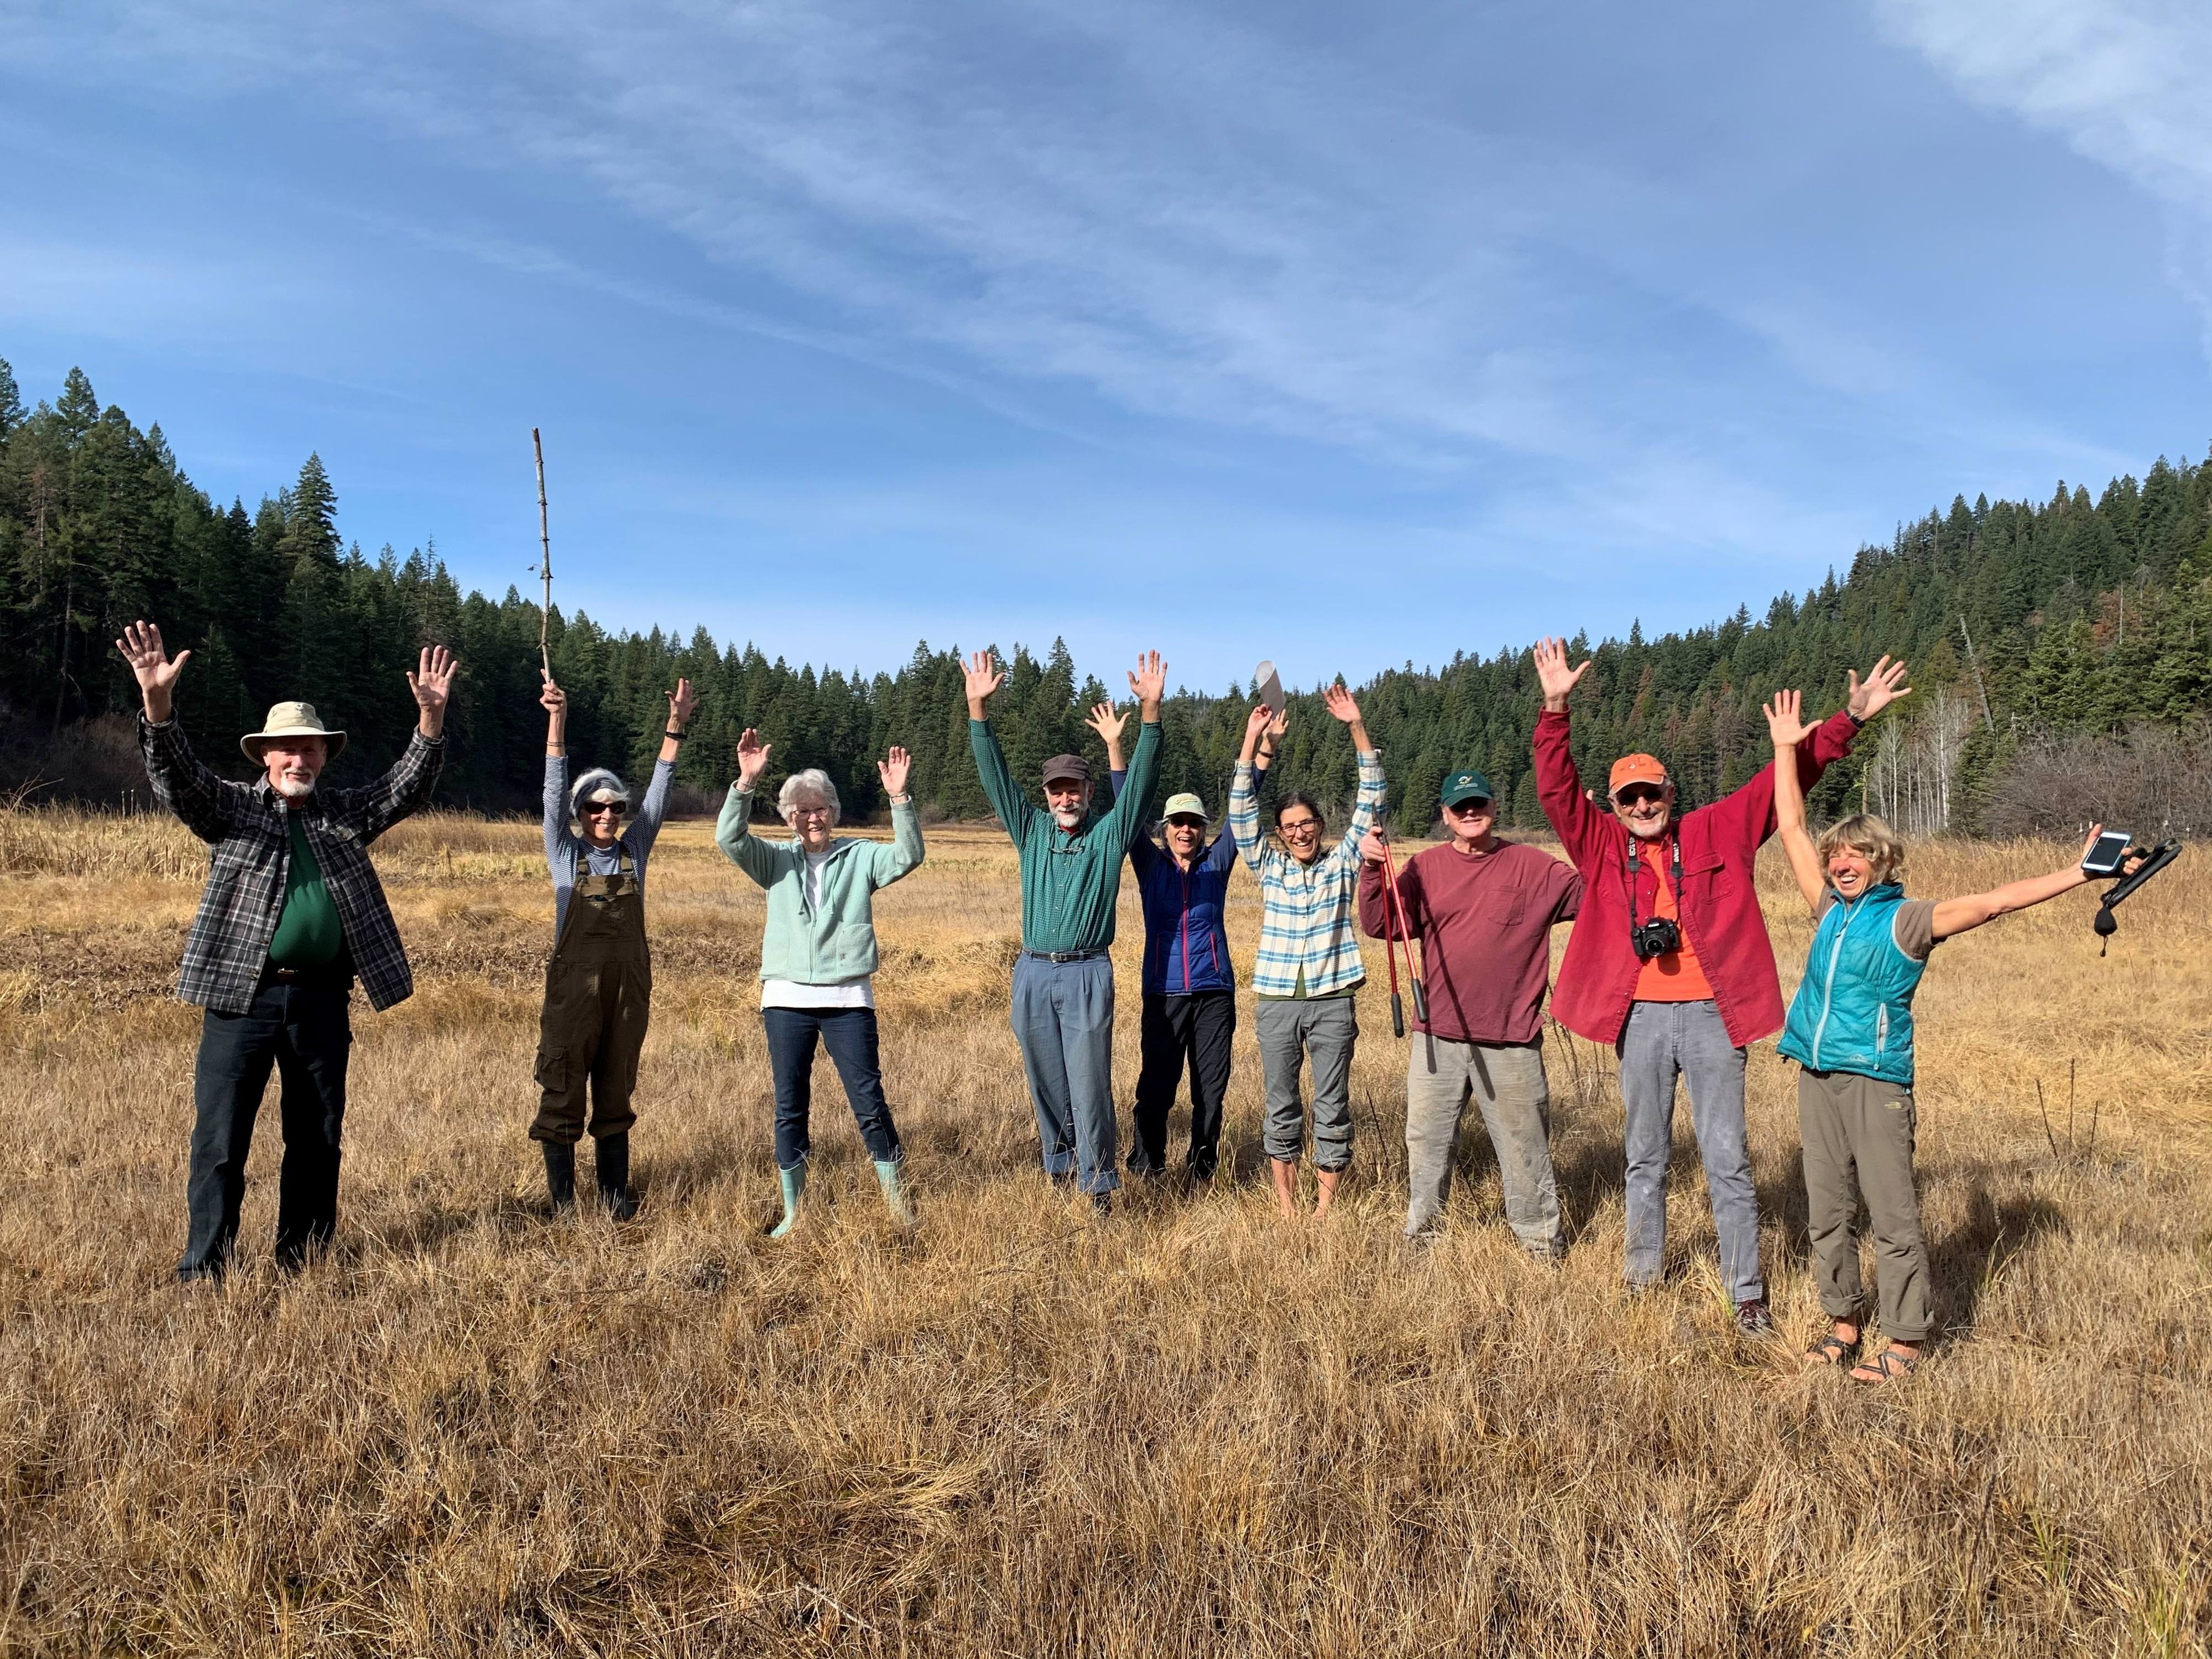 Nine people standing in a grassy field in colorful hiking clothing with their hands in the air, forest in the background.